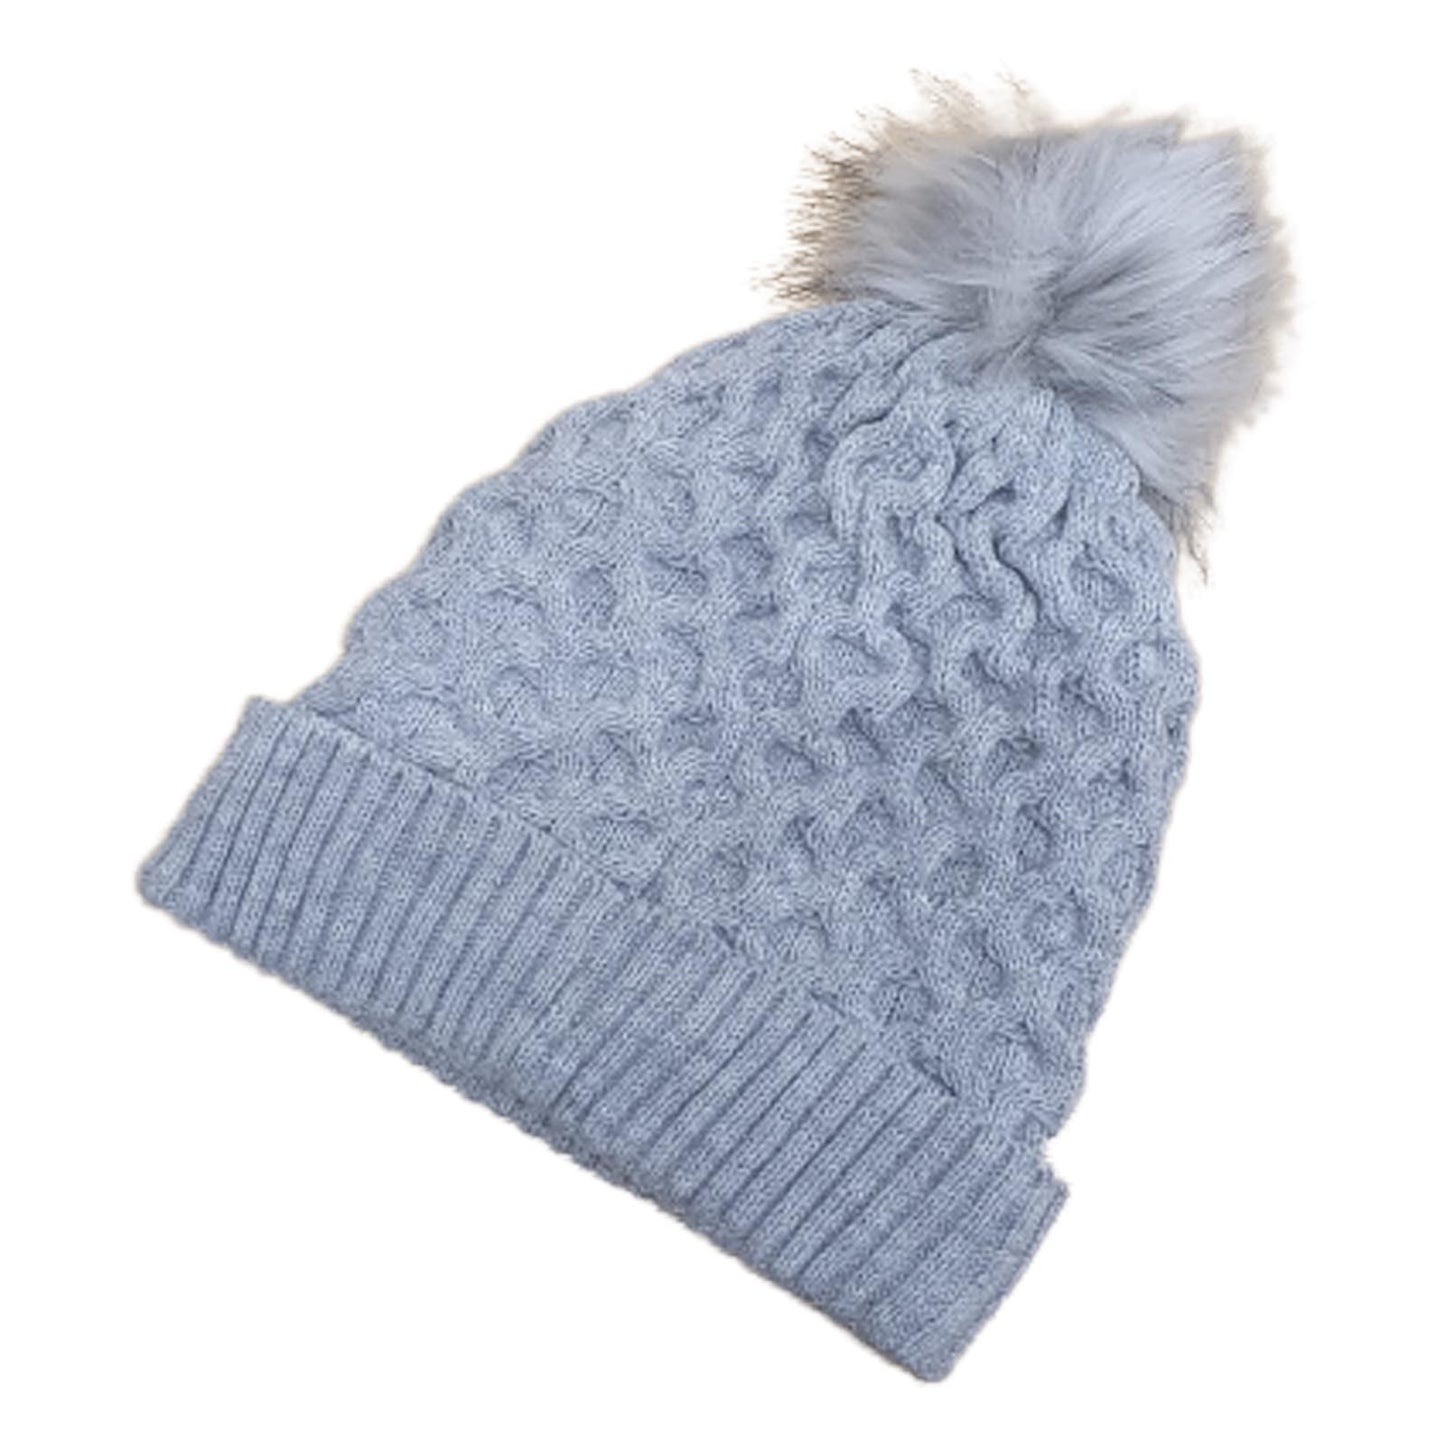 Ping Classic Knit Bobble Hat - grey